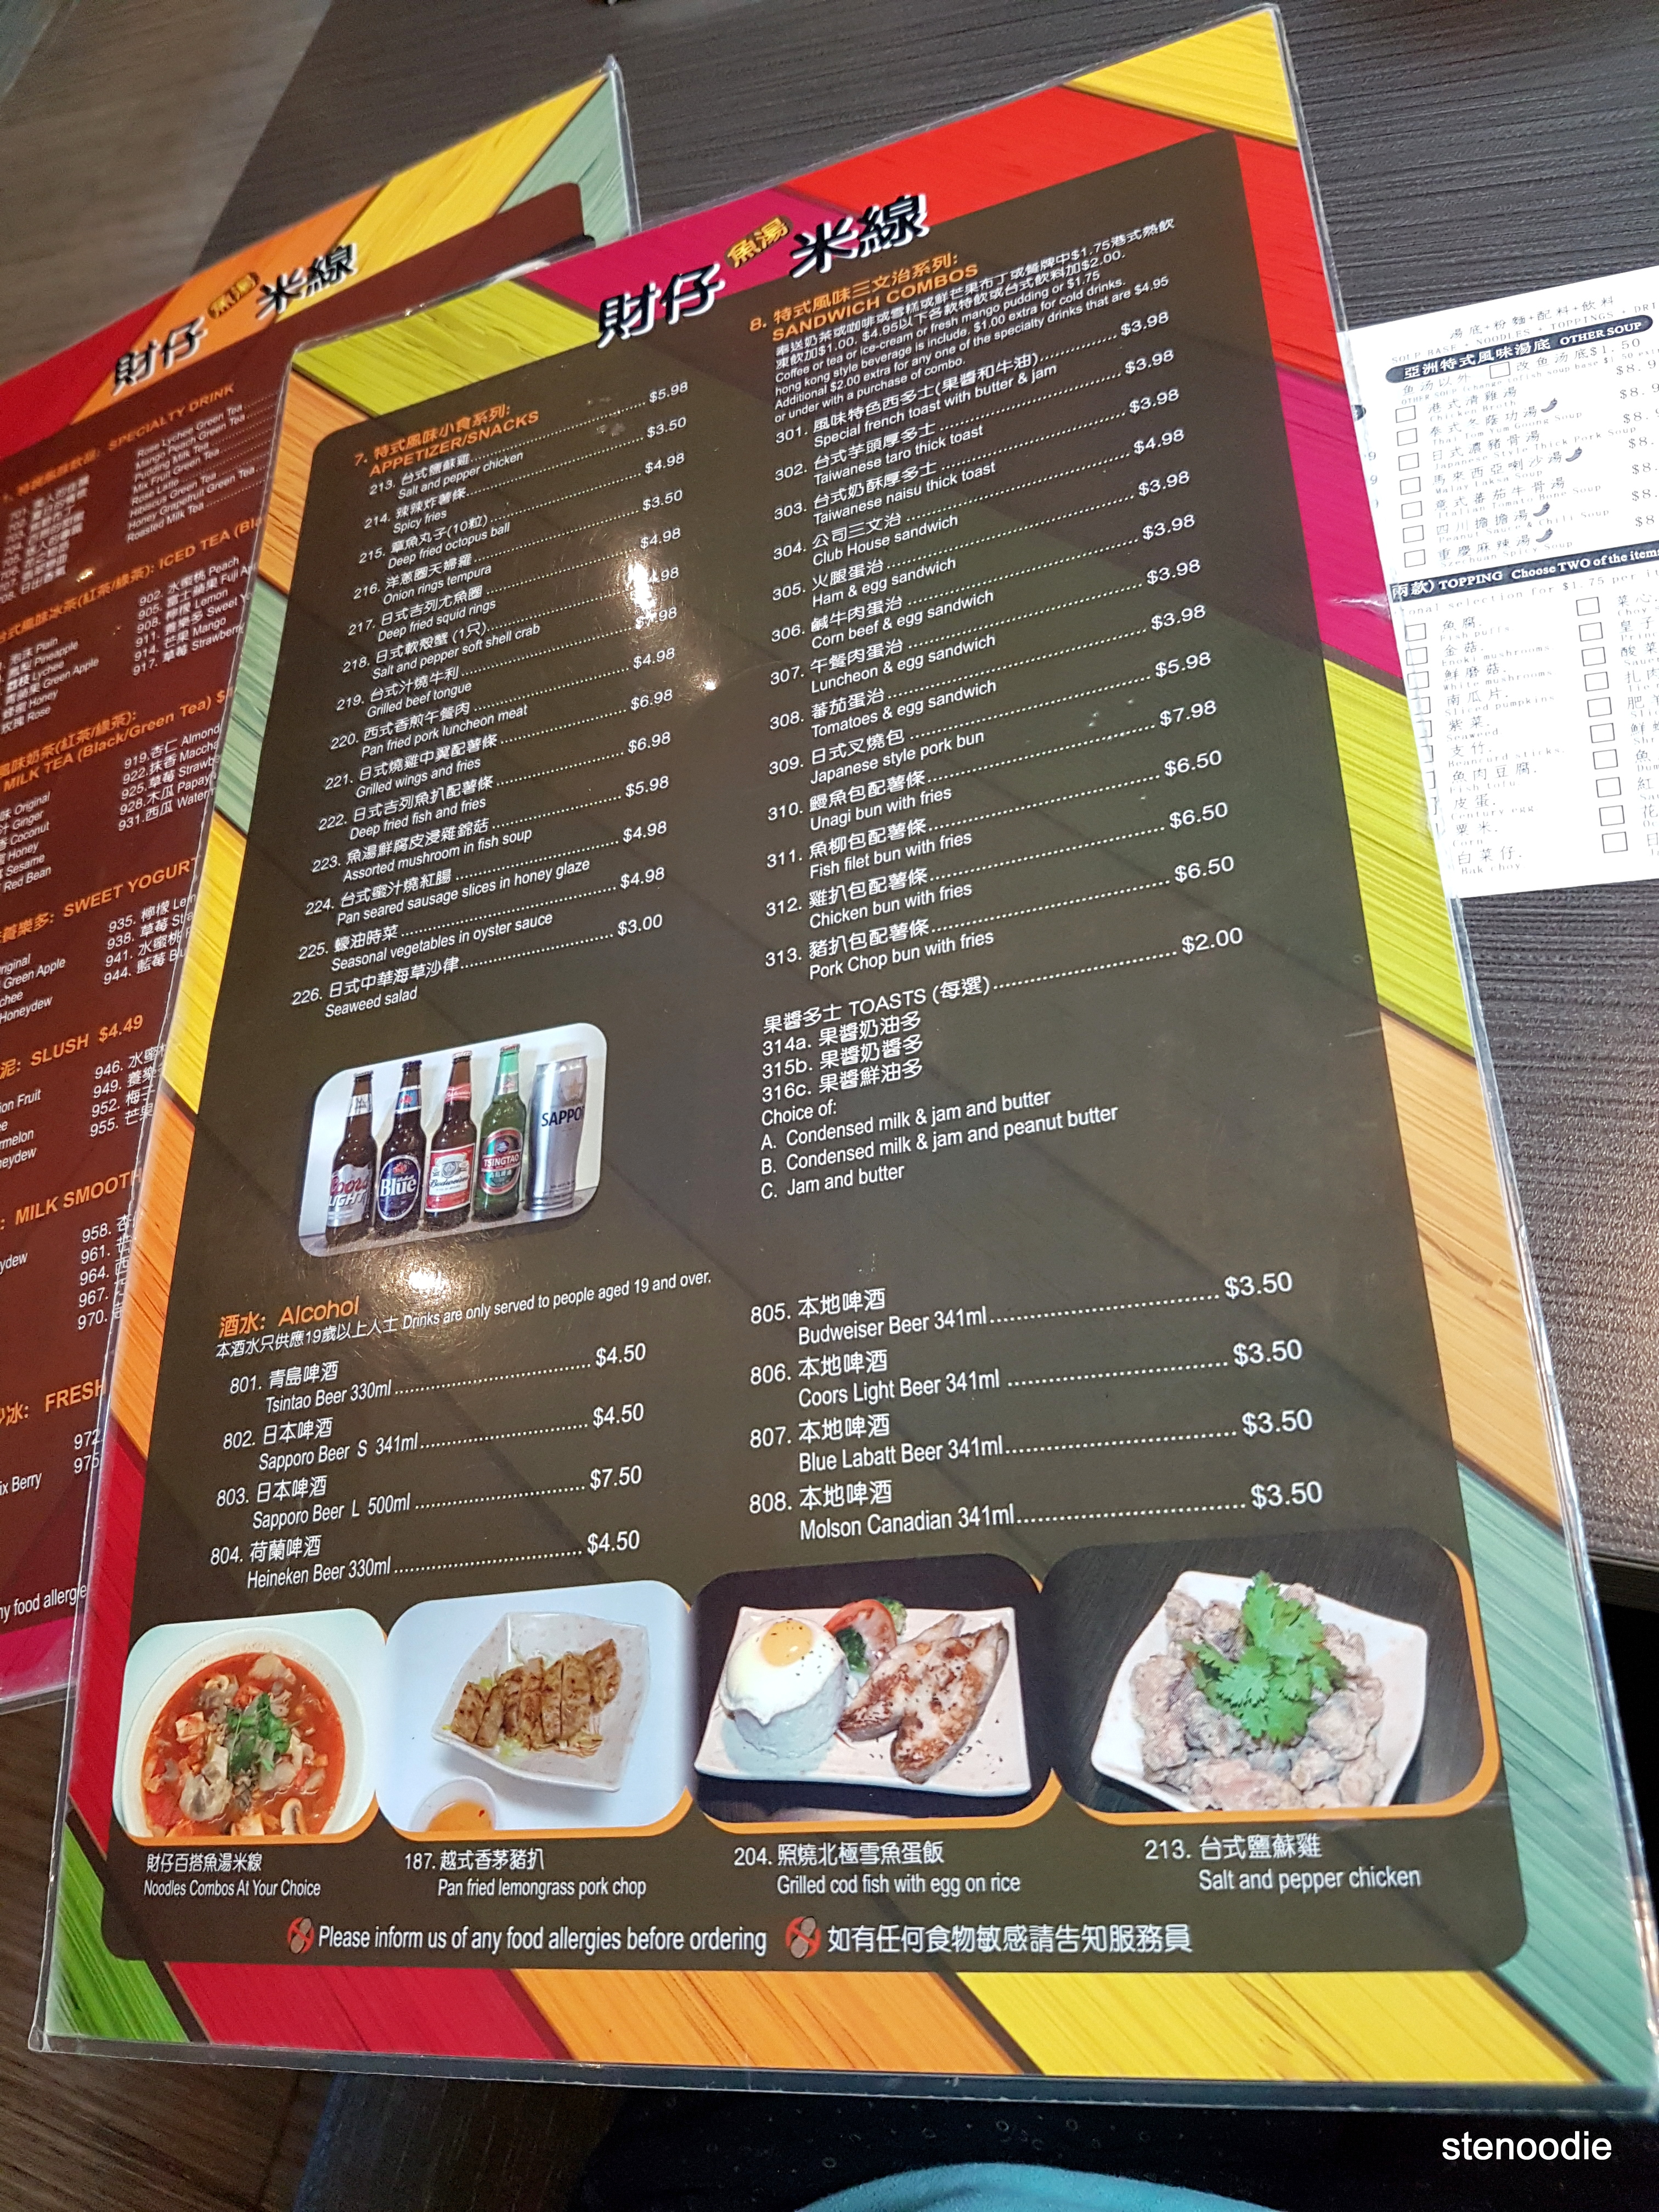  Lucky Noodle menu and prices